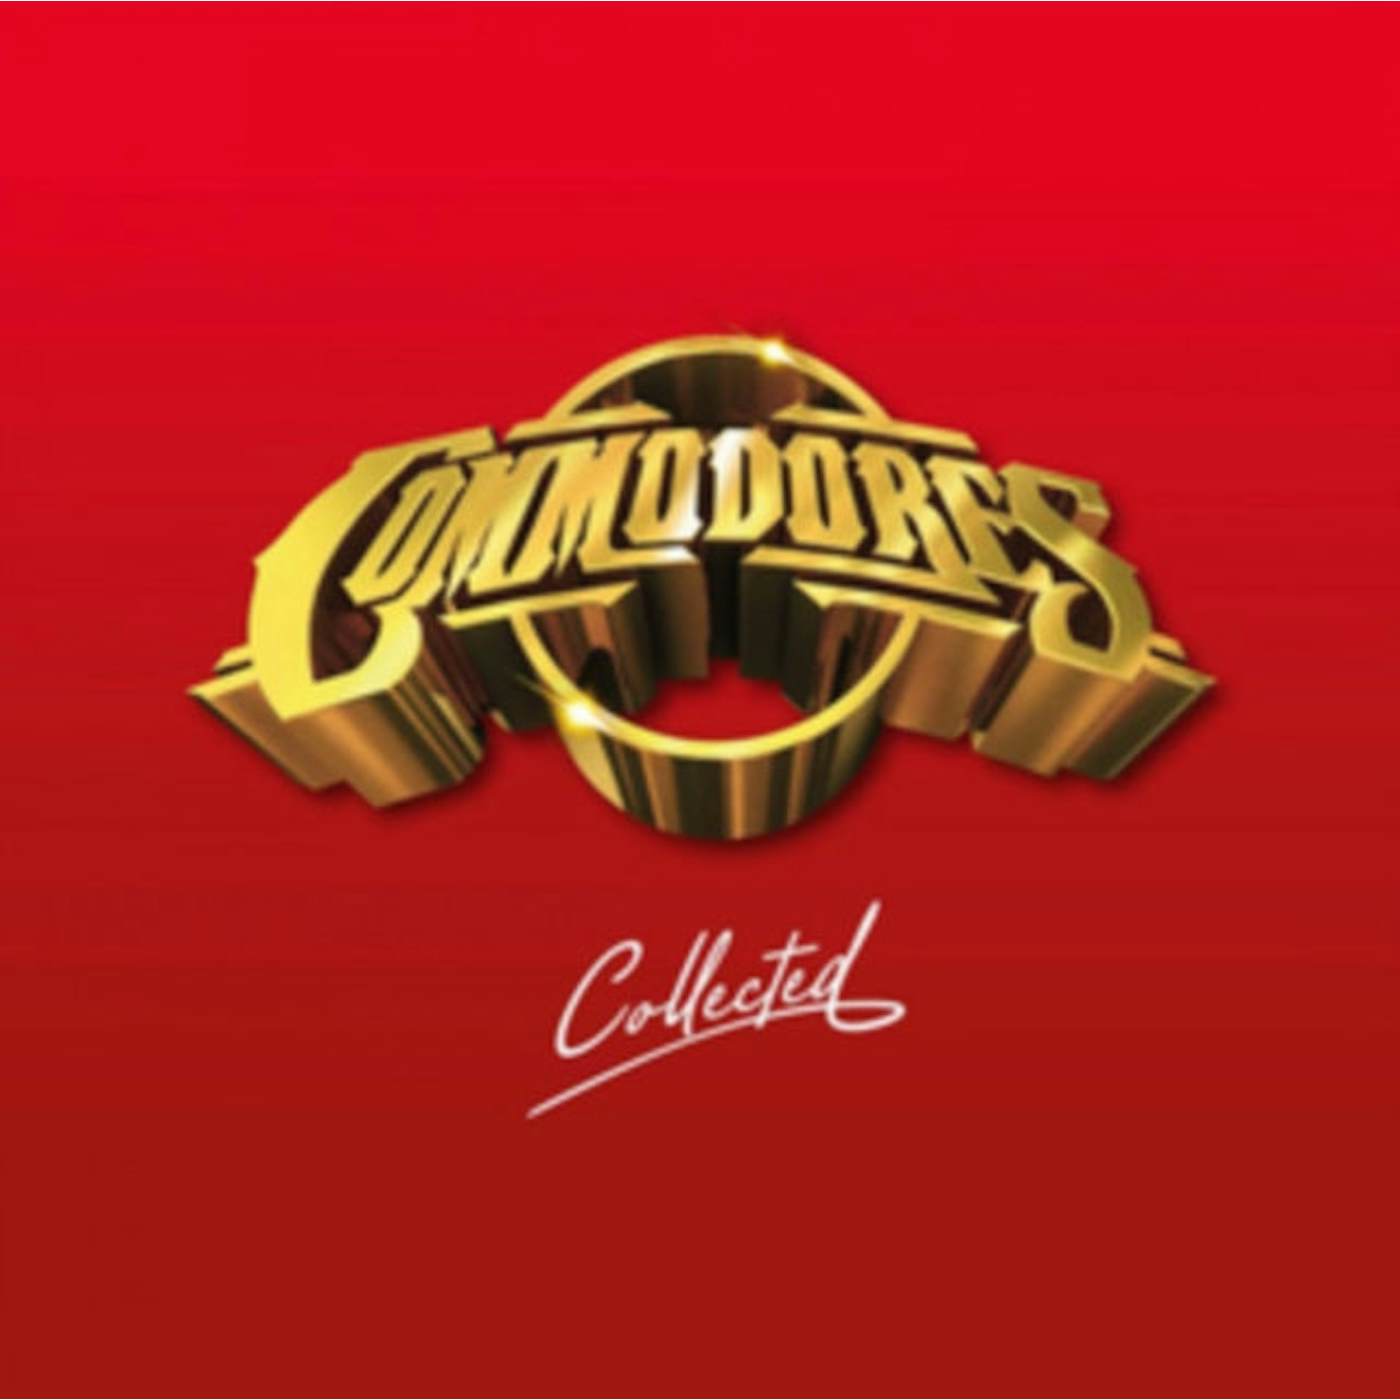 Commodores LP Vinyl Record - Collected